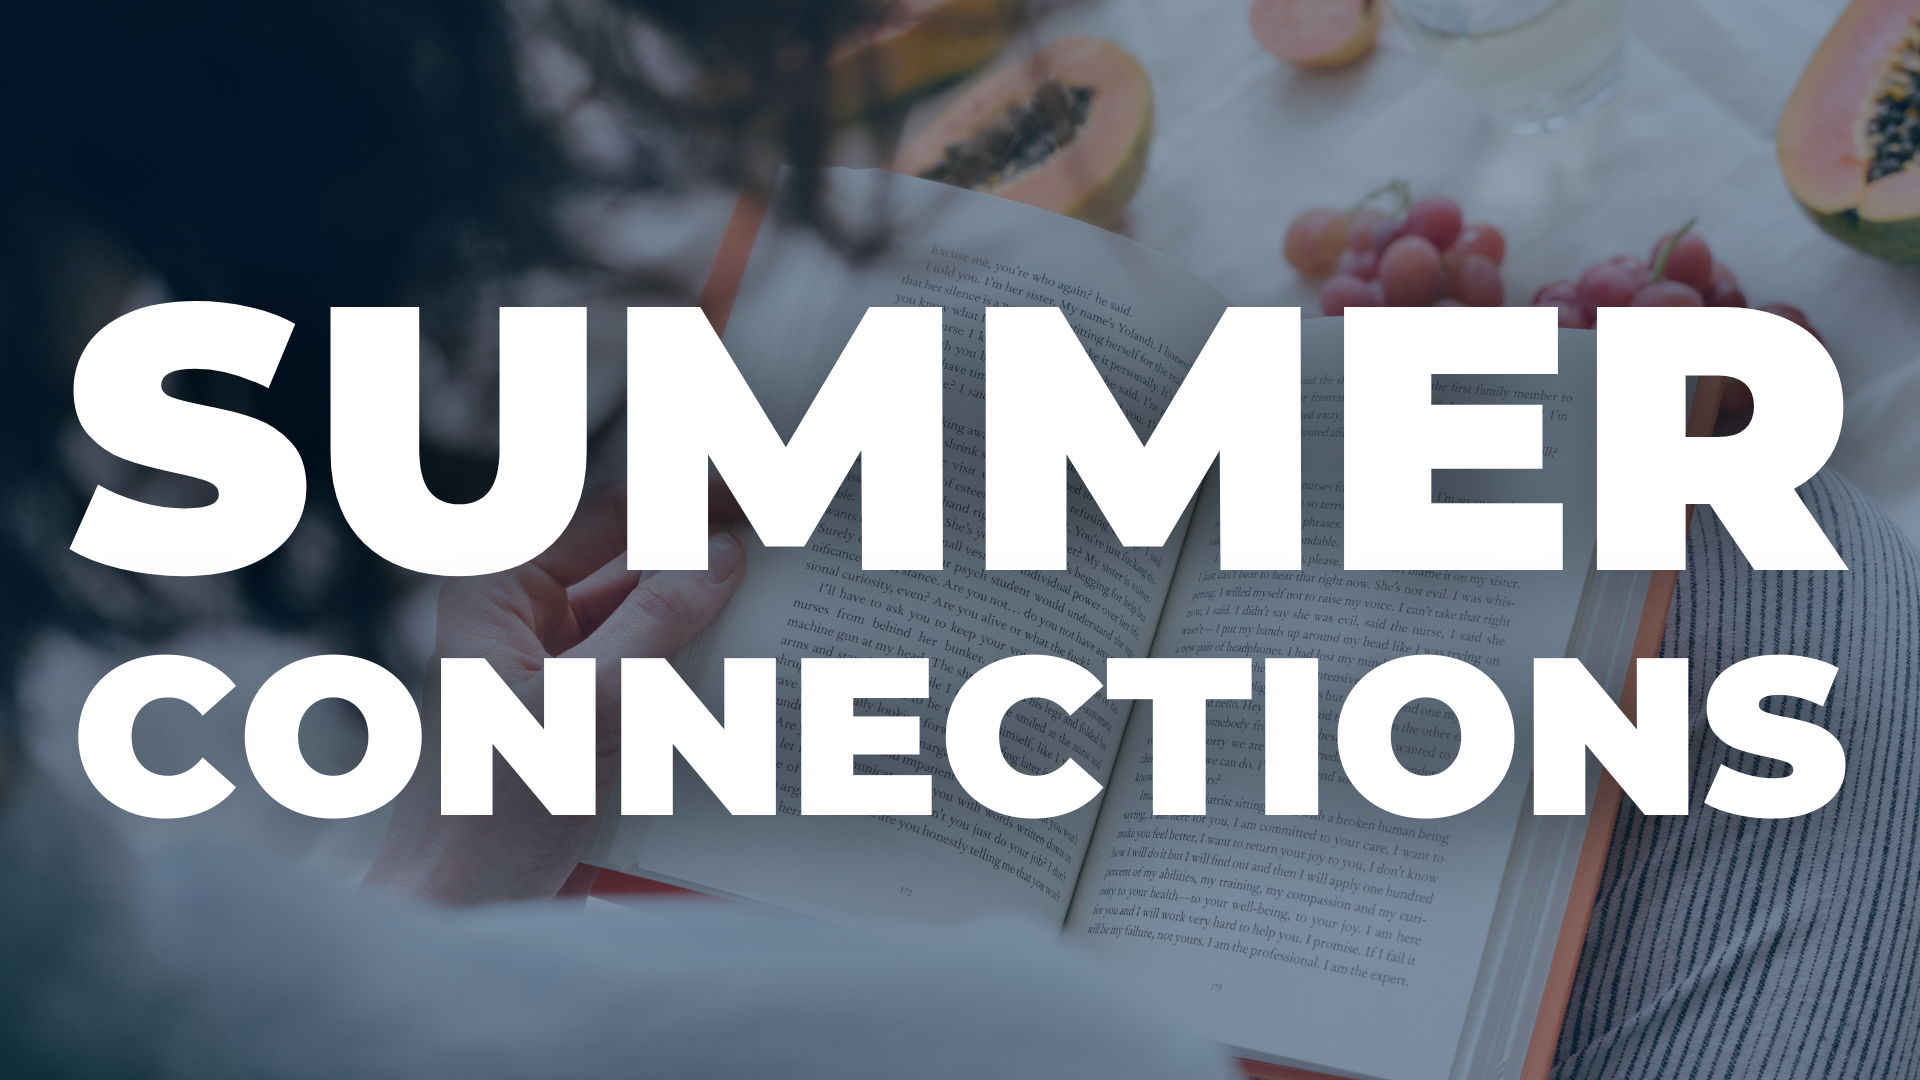 Text "Summer Connections" over a photo of someone reading a book.